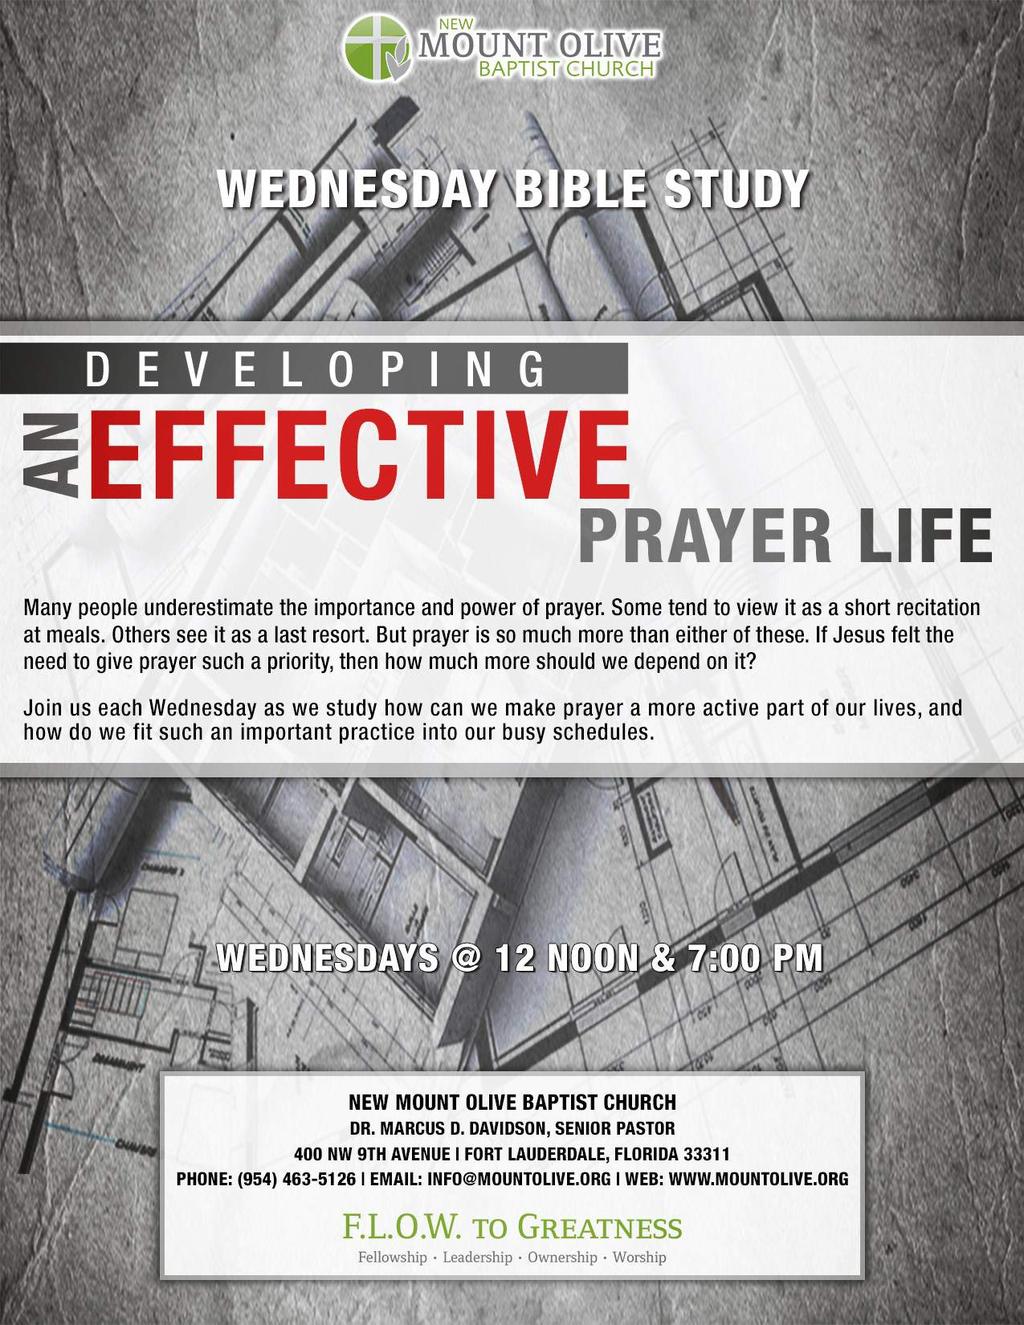 Ministry Messages Attention All Members & Friends, Pastor Davidson is asking everyone to attend Prayer Meeting and Bible Study on Wednesdays at 6:30pm.